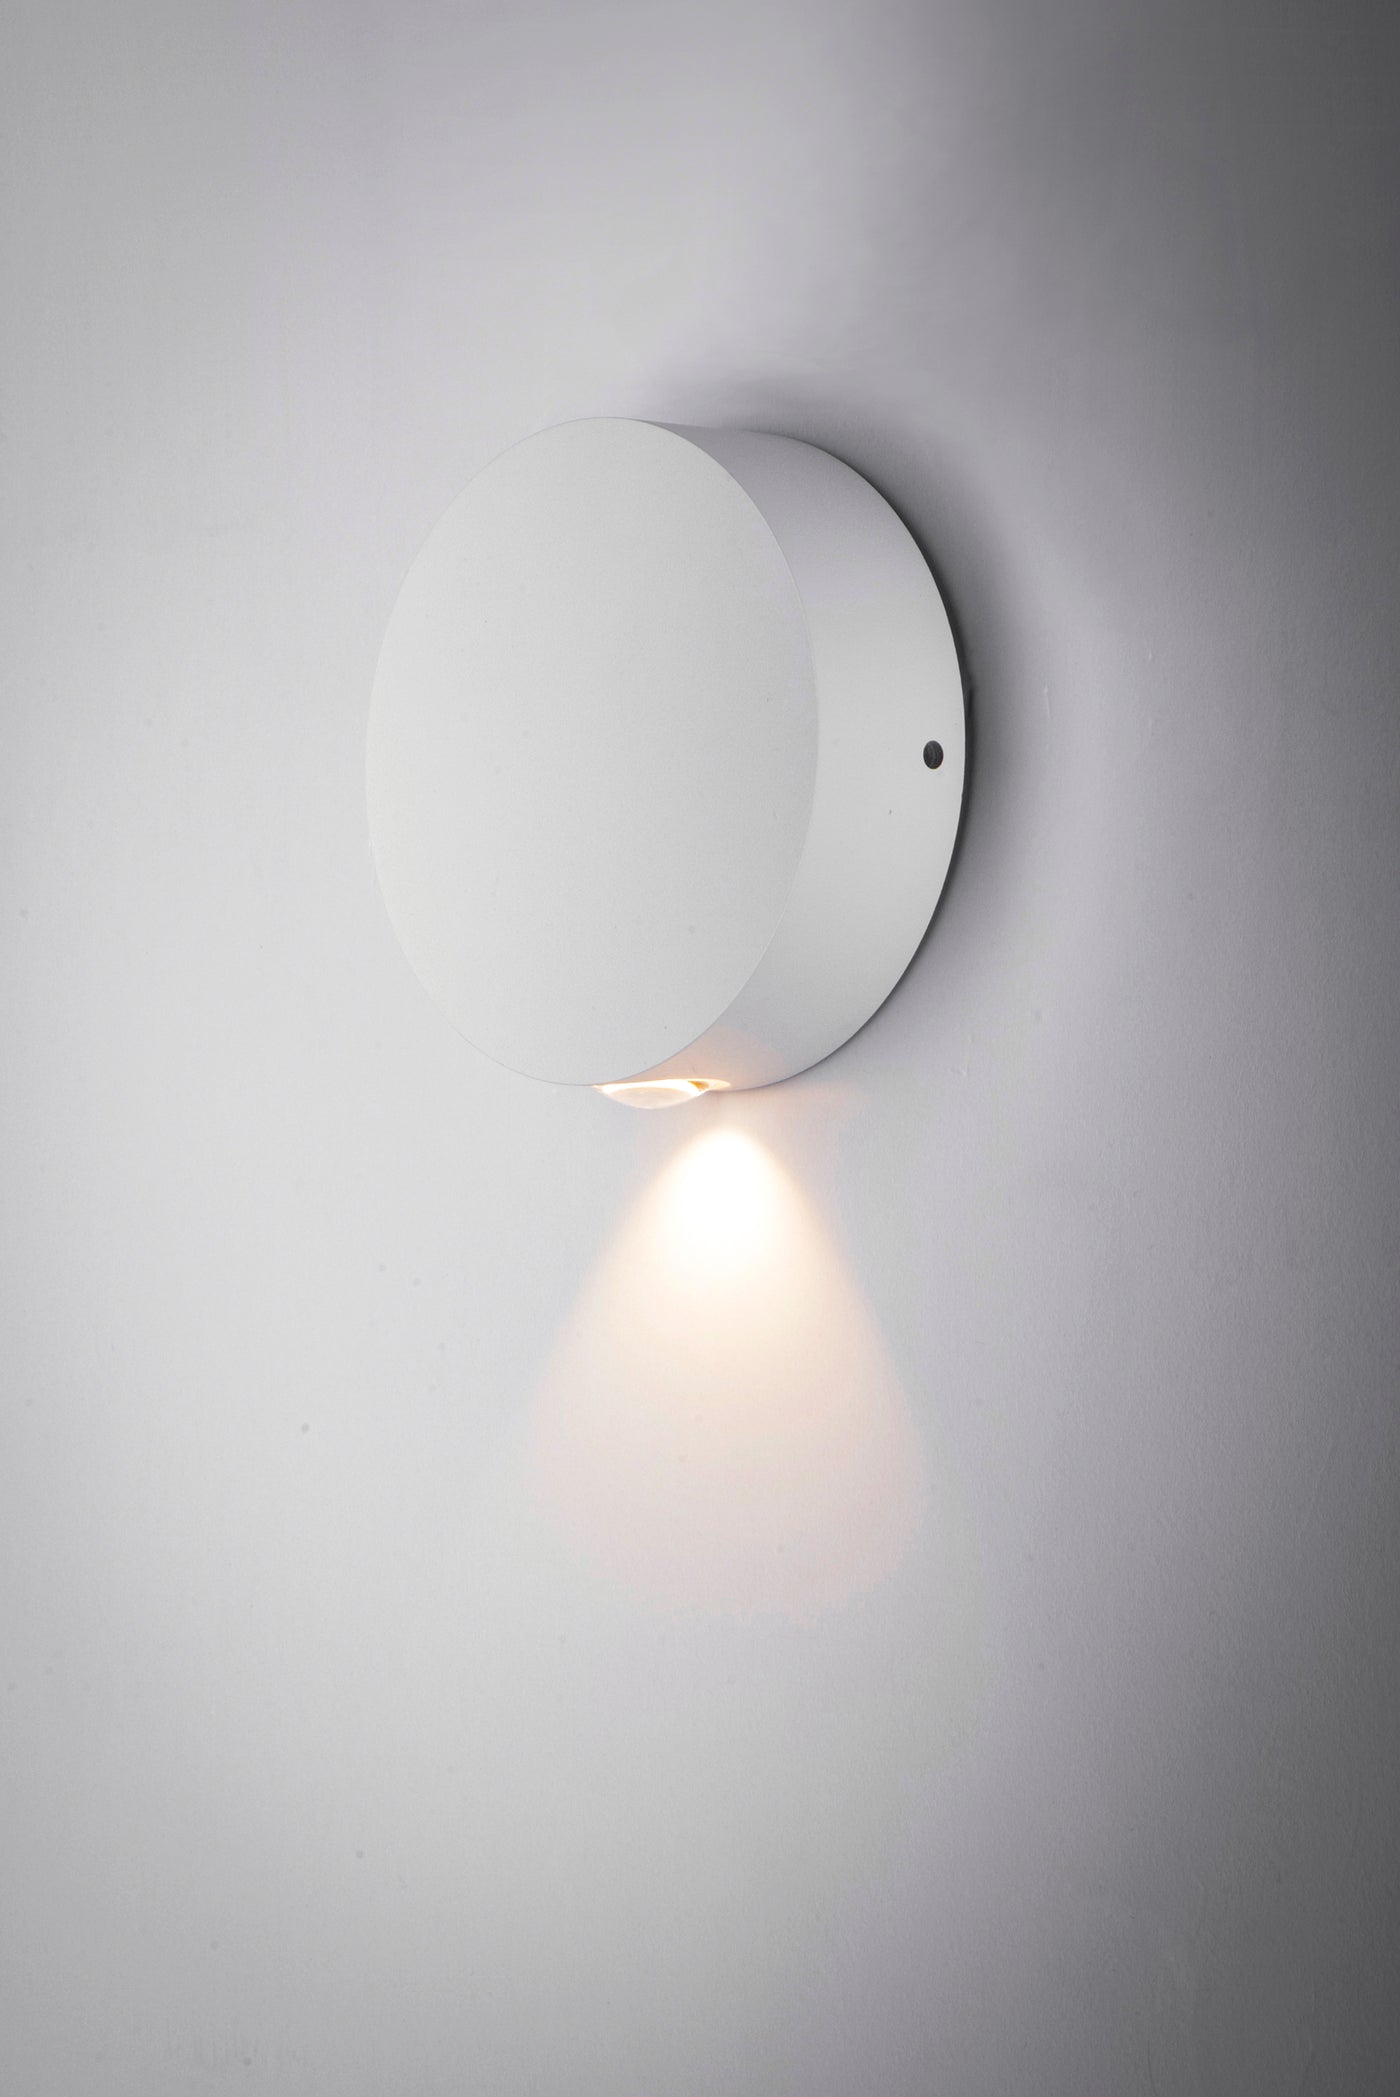  Alumilux LED Outdoor Wall Sconce E41540-WT Wall Sconce